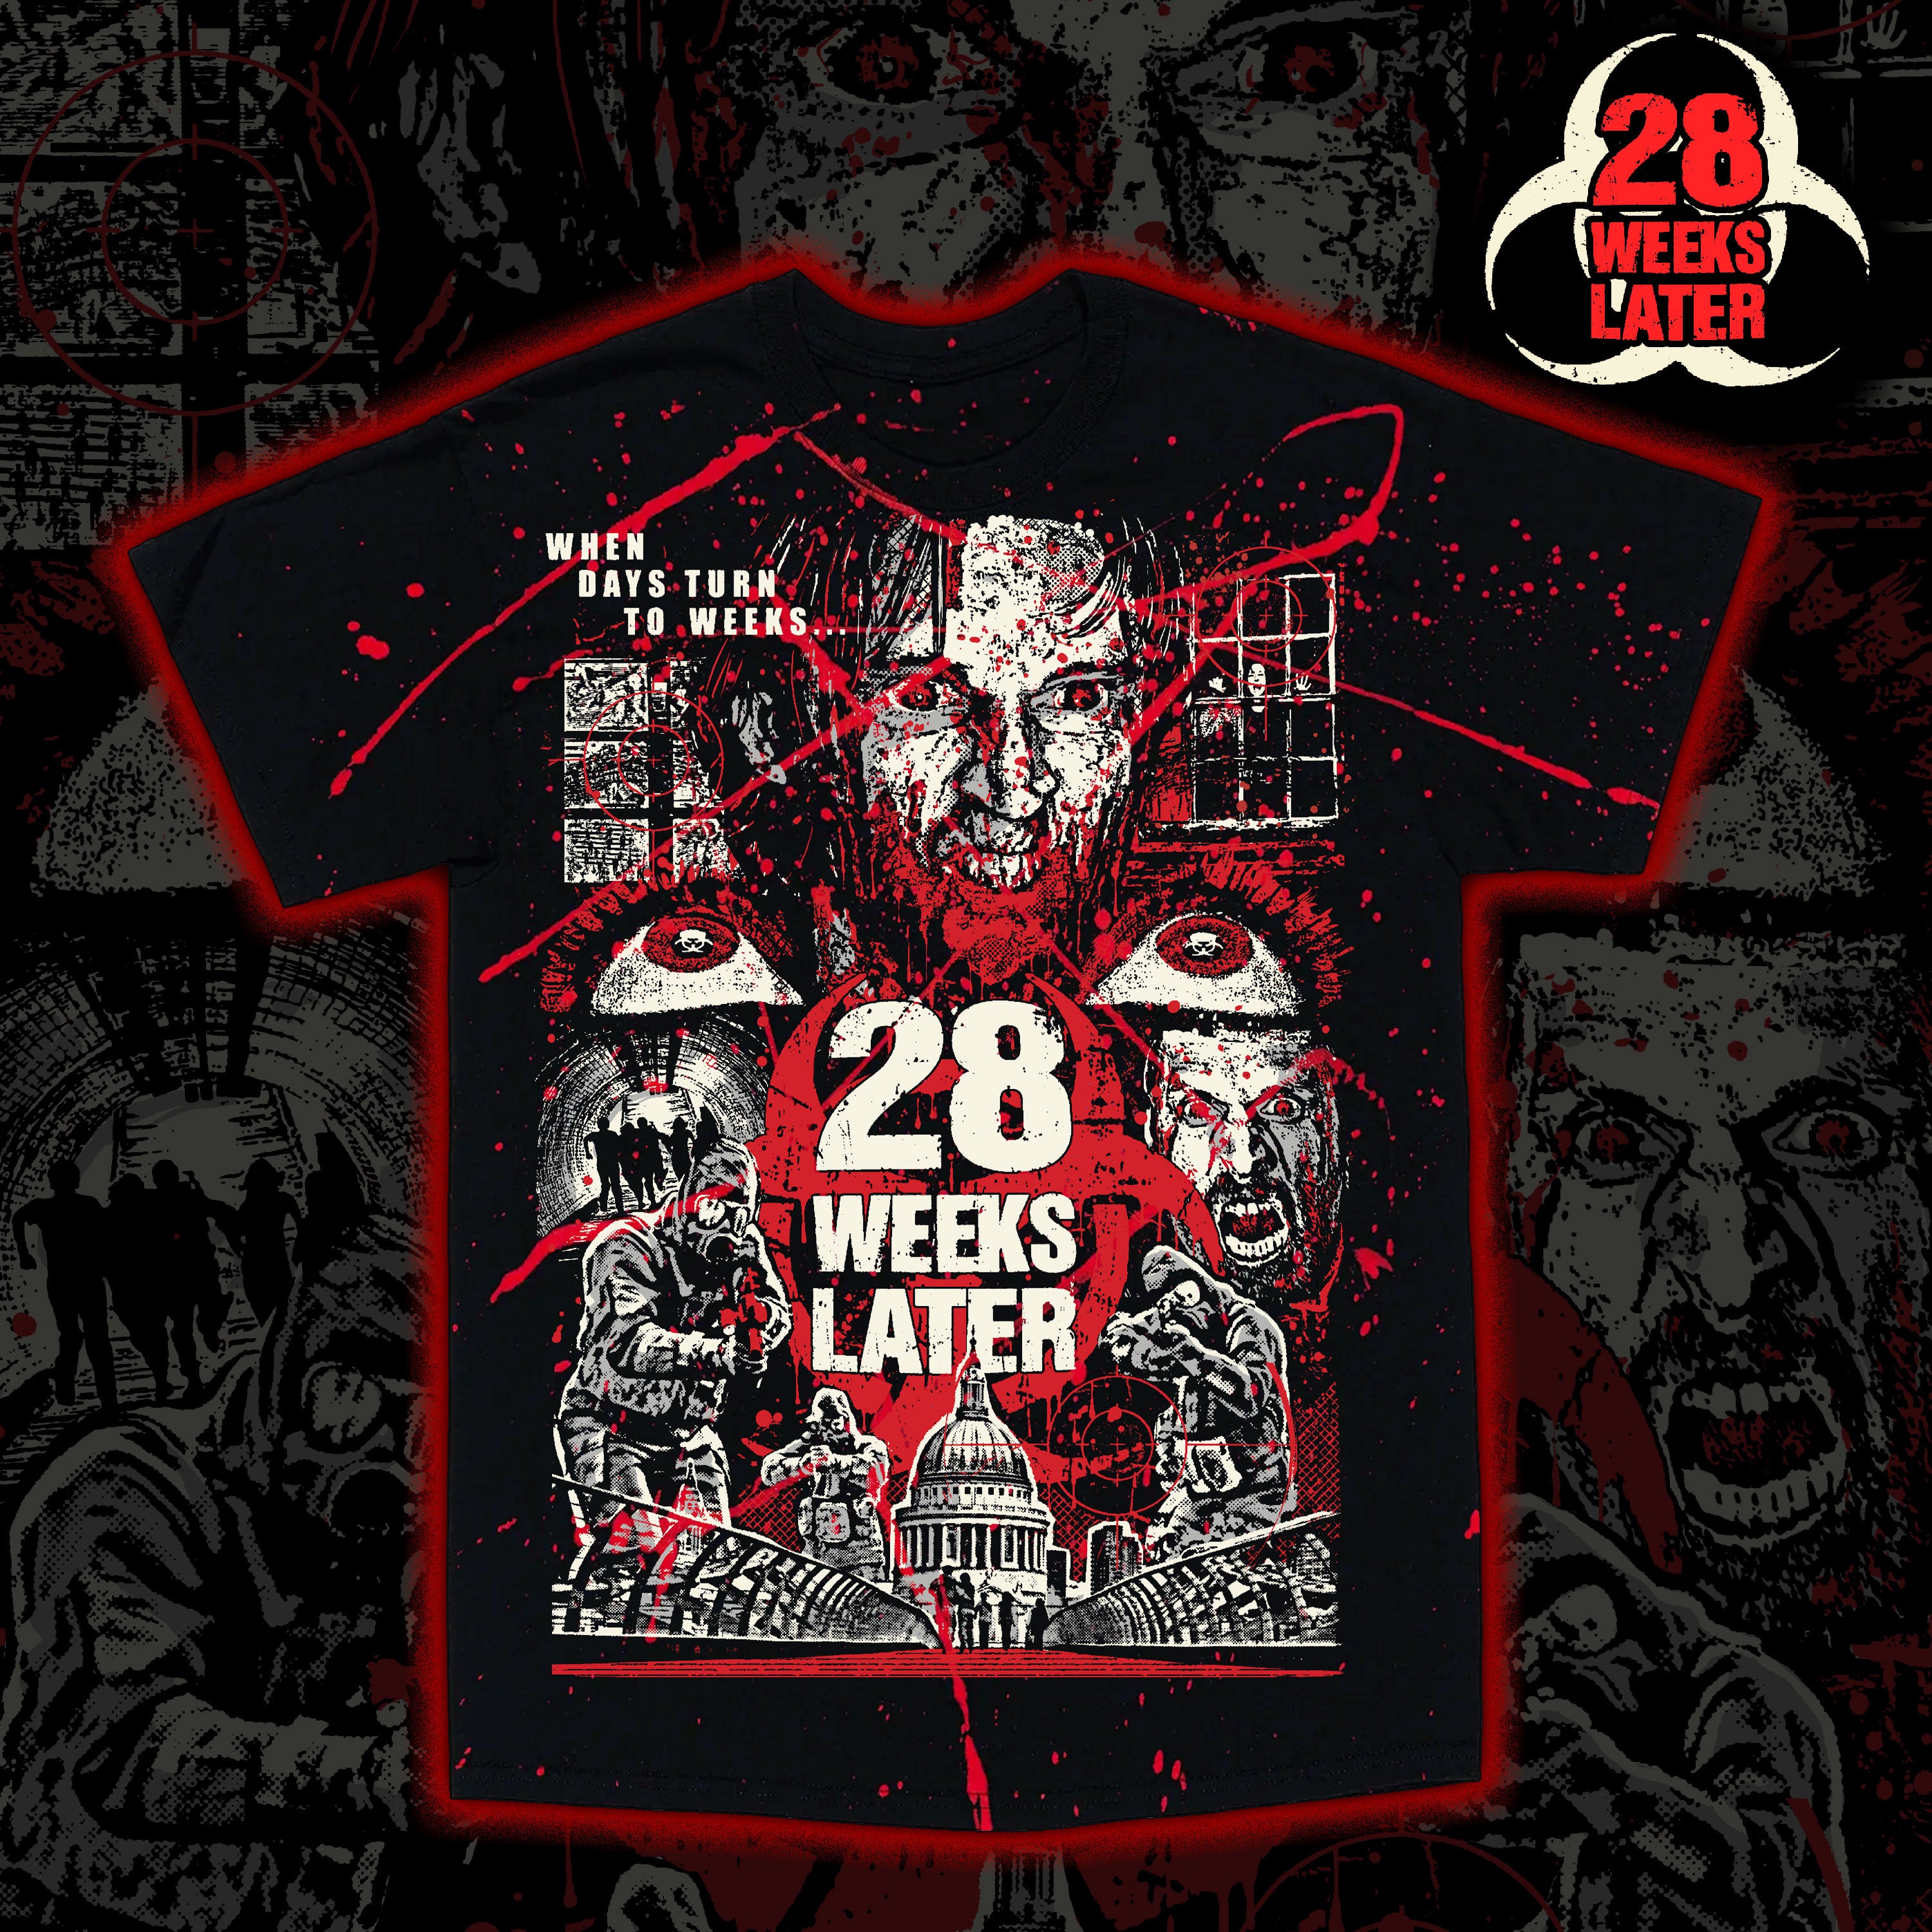 28 Weeks Later "Re-Infection" Tie dye